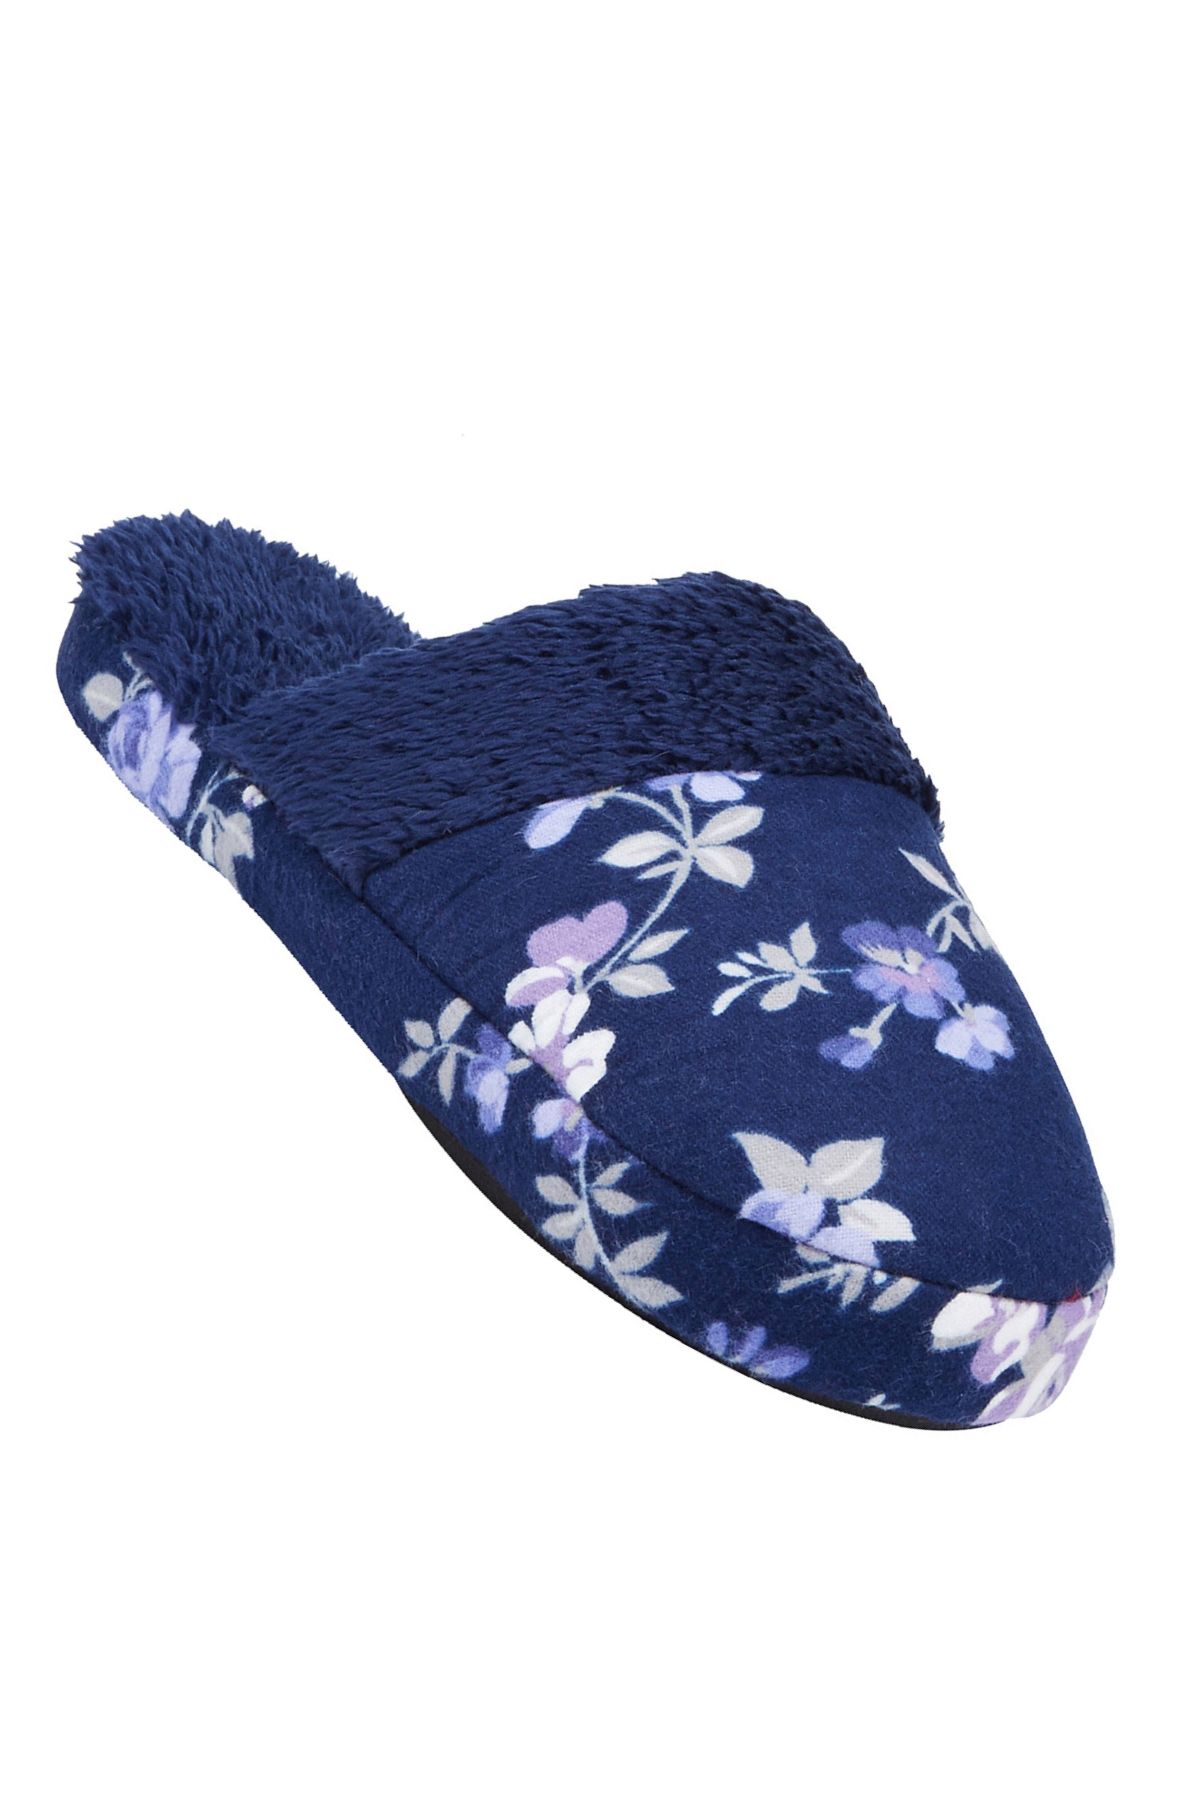 Charter Club Intimates Blue Rose-Garden Floral Flannel Slippers